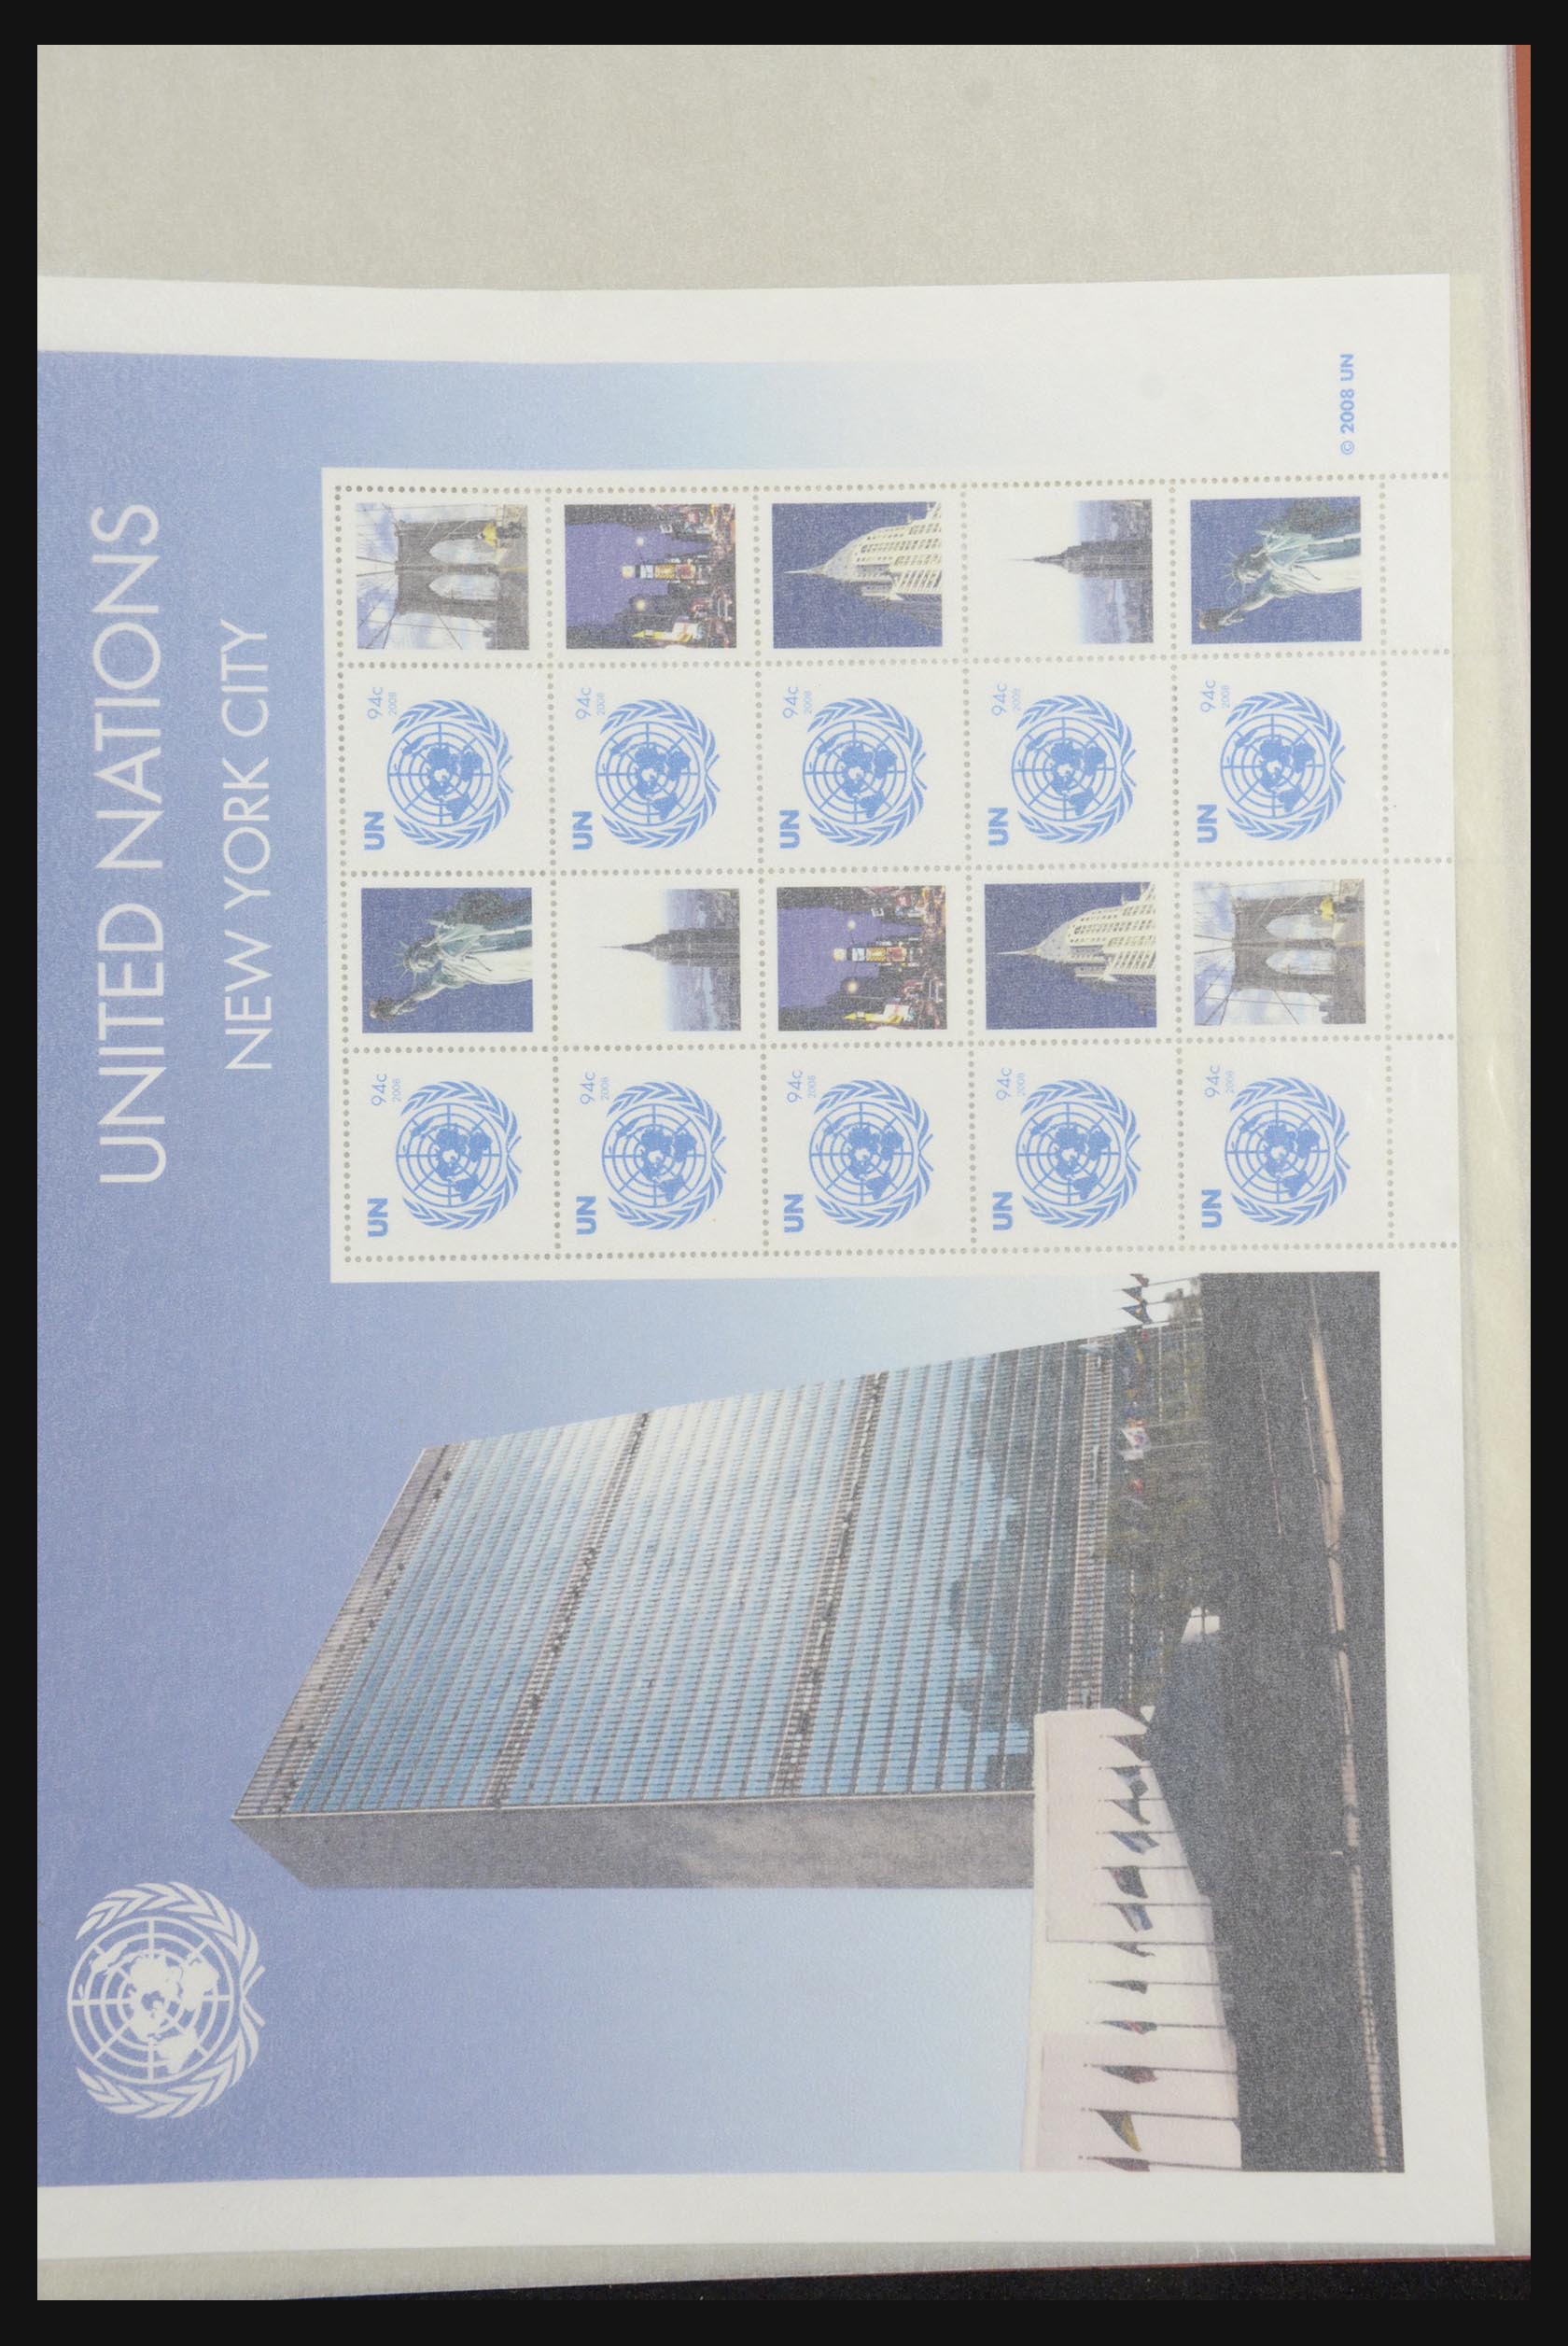 31674 009 - 31674 United Nations personalised sheetlets 2003-2012.